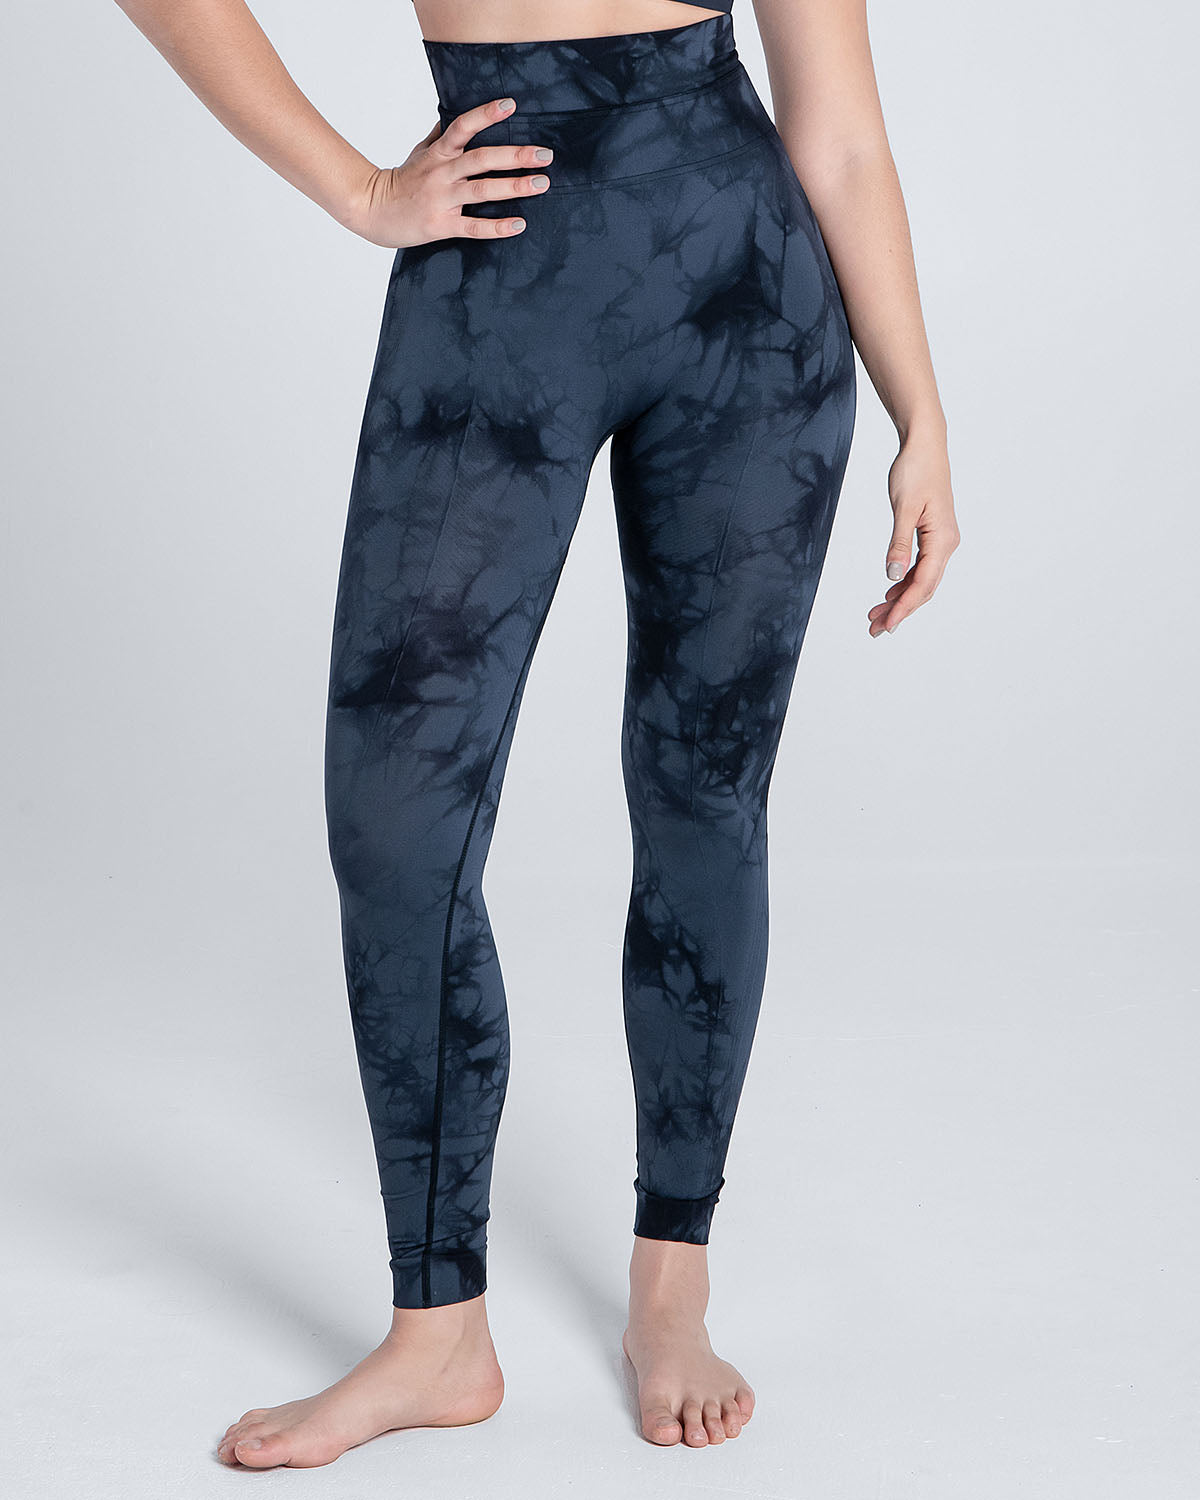 Cosmolle Best Activewear Sets & Yoga Sets: Level Up Your Workout